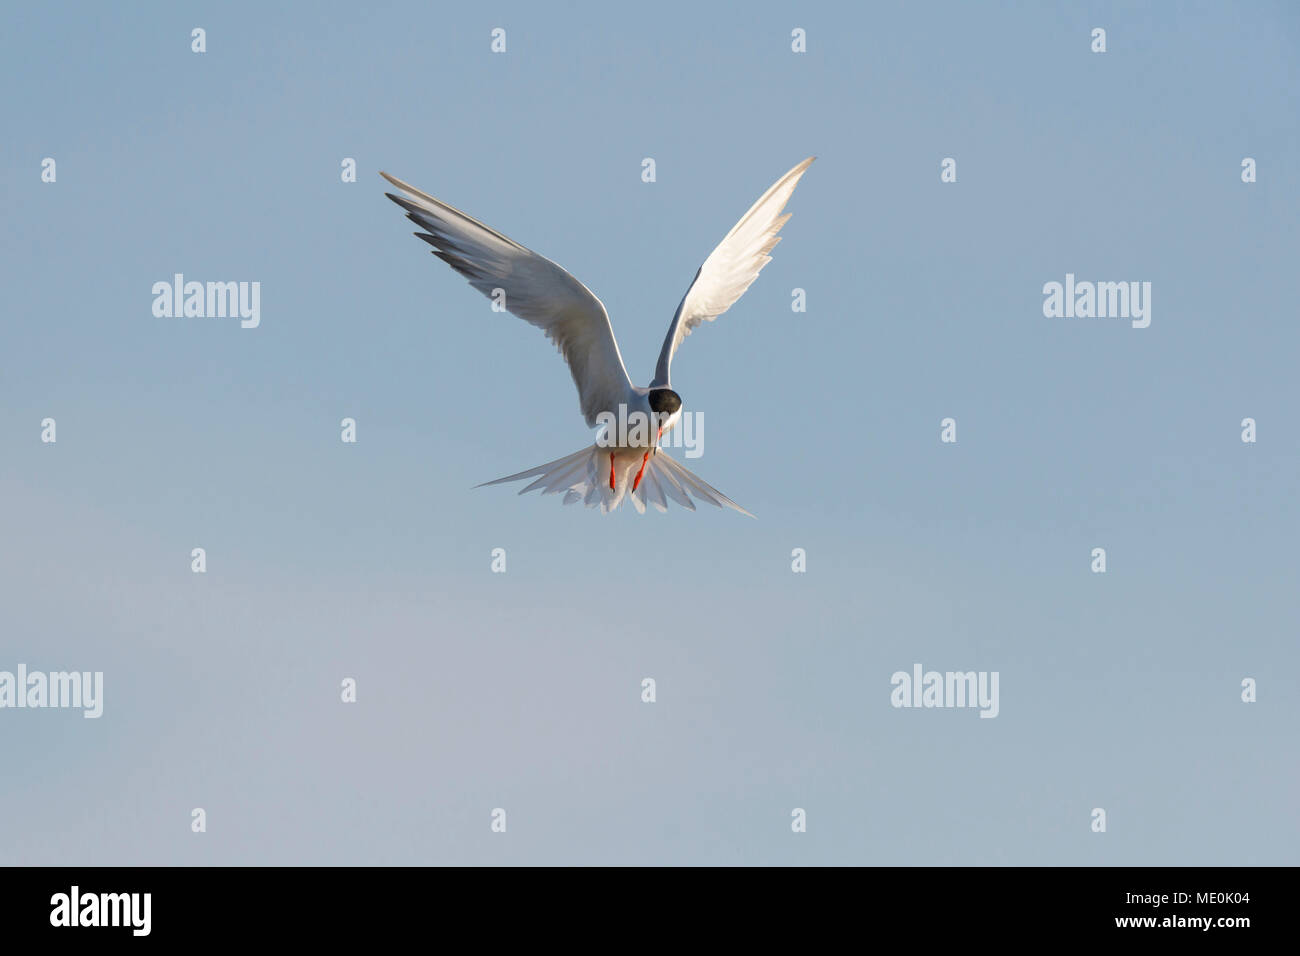 Front view of a common tern (Sterna hirundo) in flight against a blue sky at Lake Neusiedl in Burgenland, Austria Stock Photo